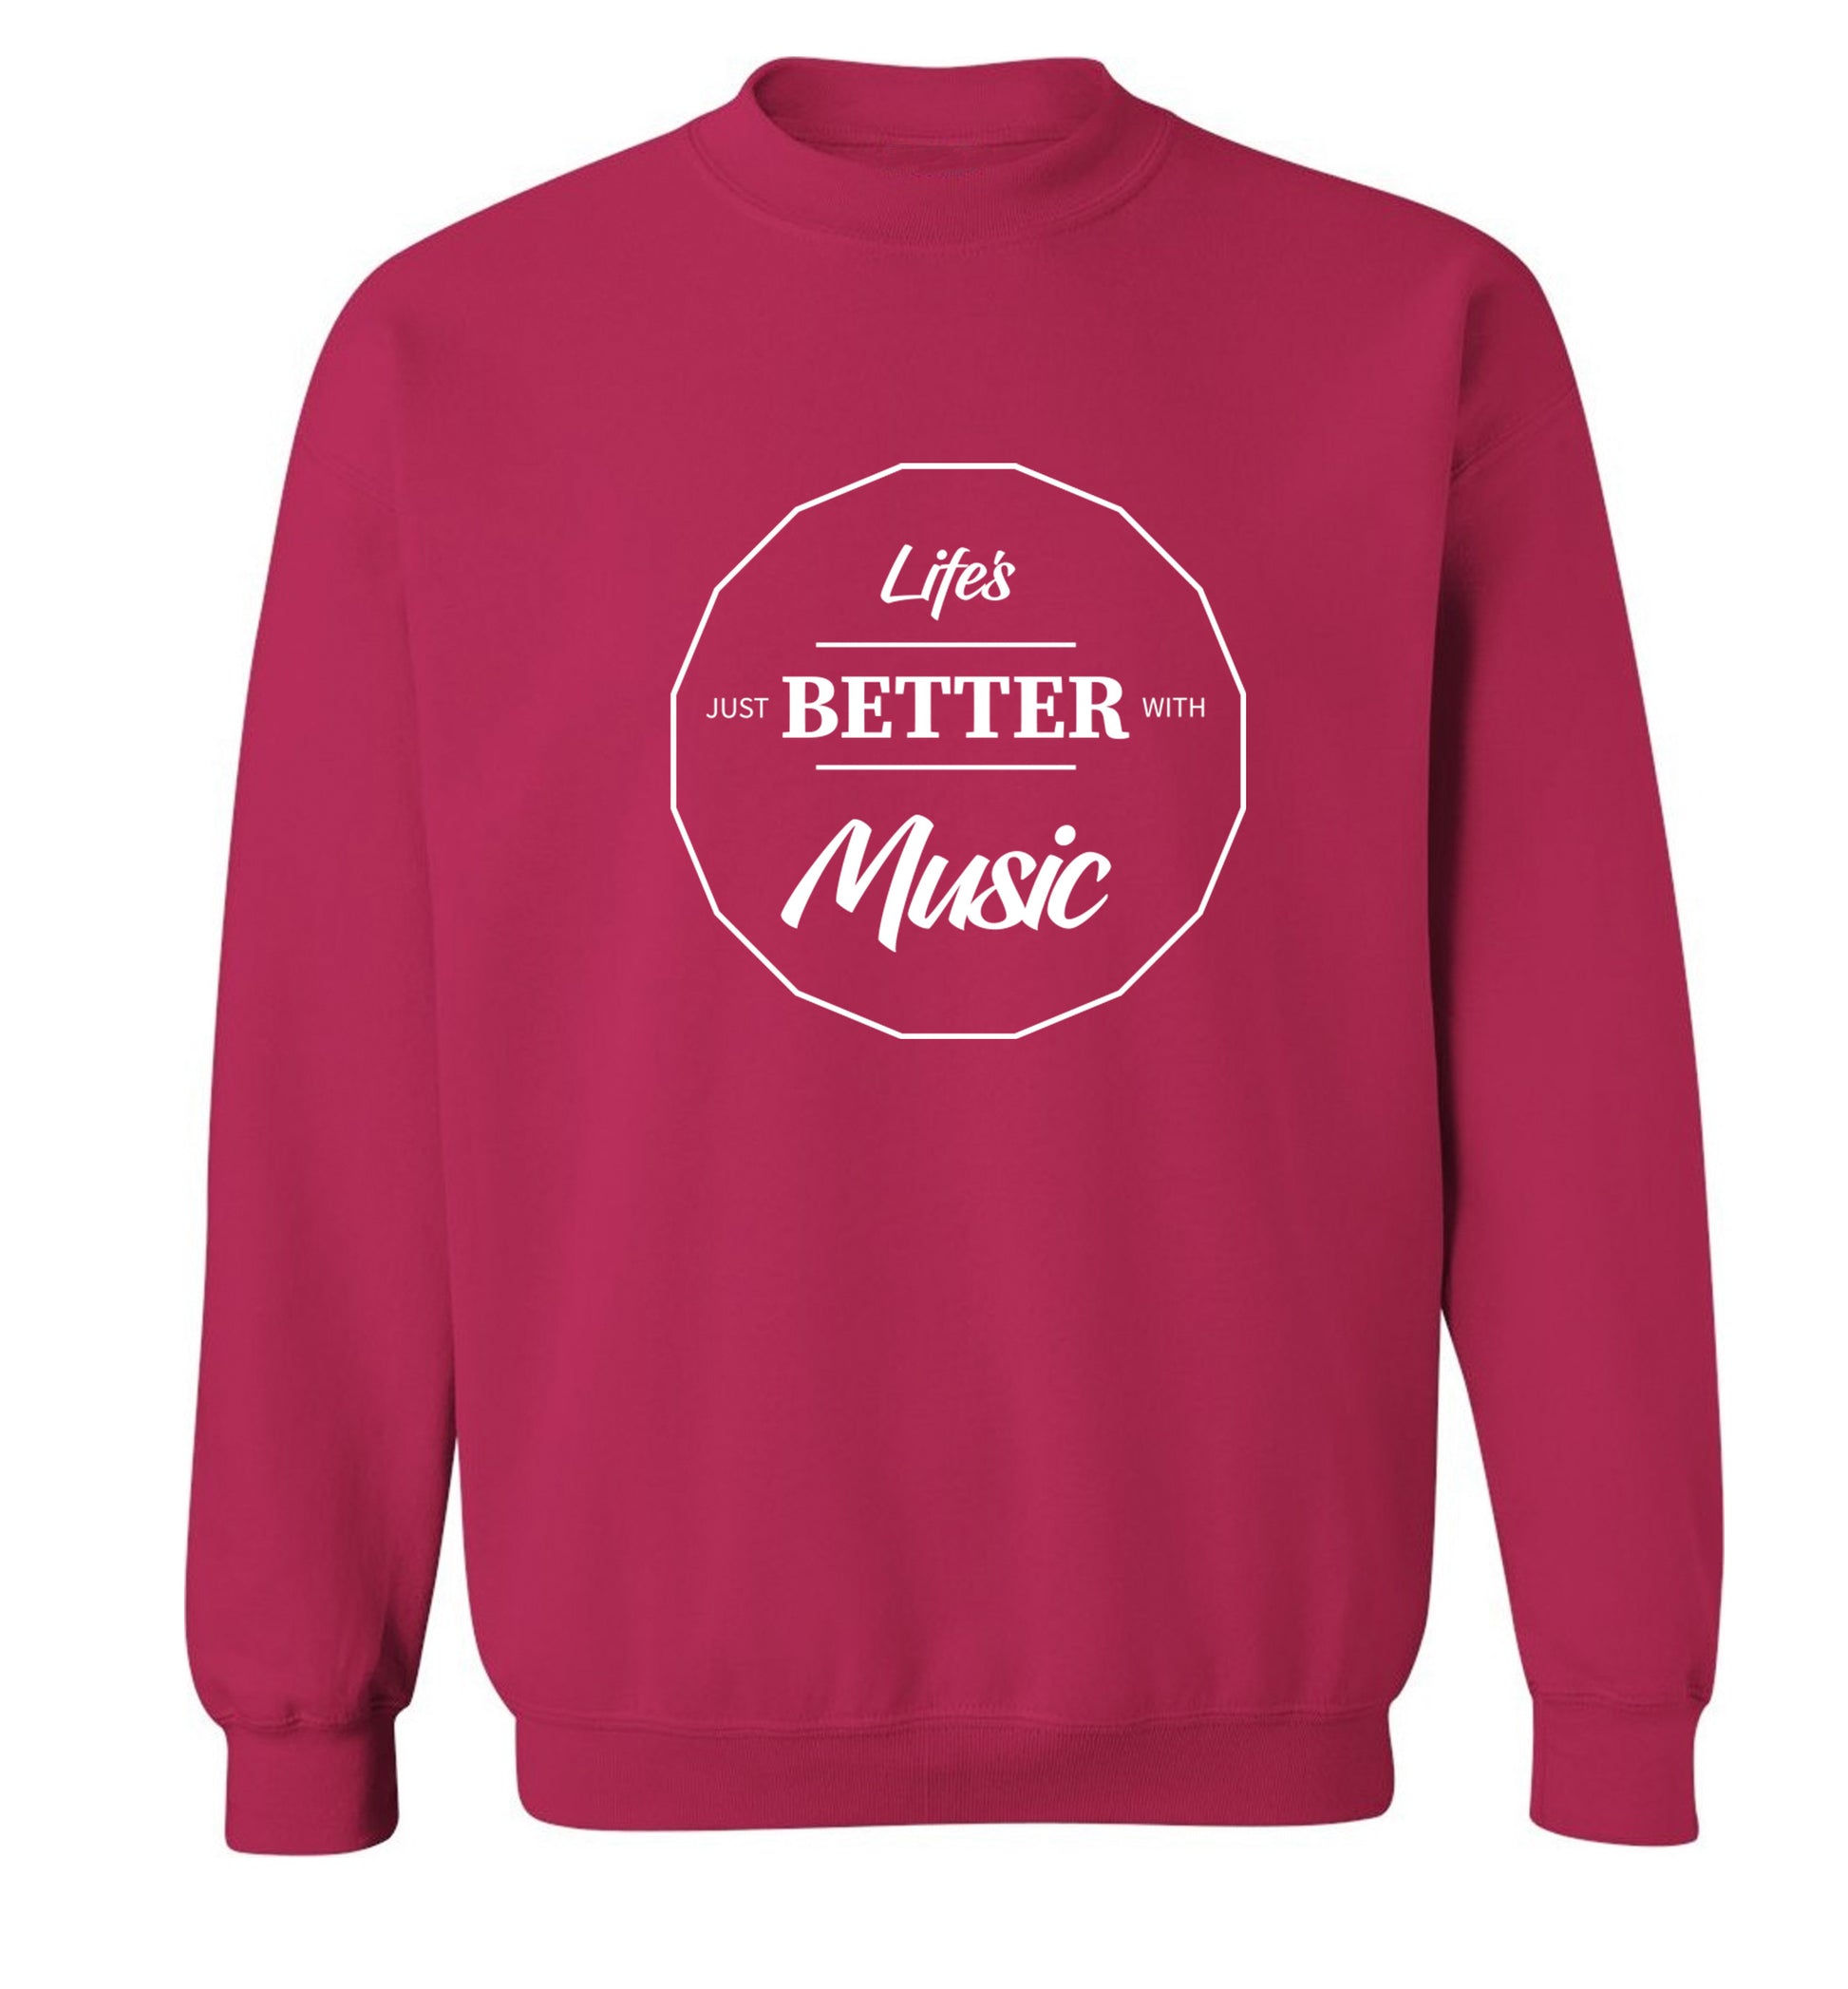 Life is Better With Music Adult's unisex pink Sweater 2XL